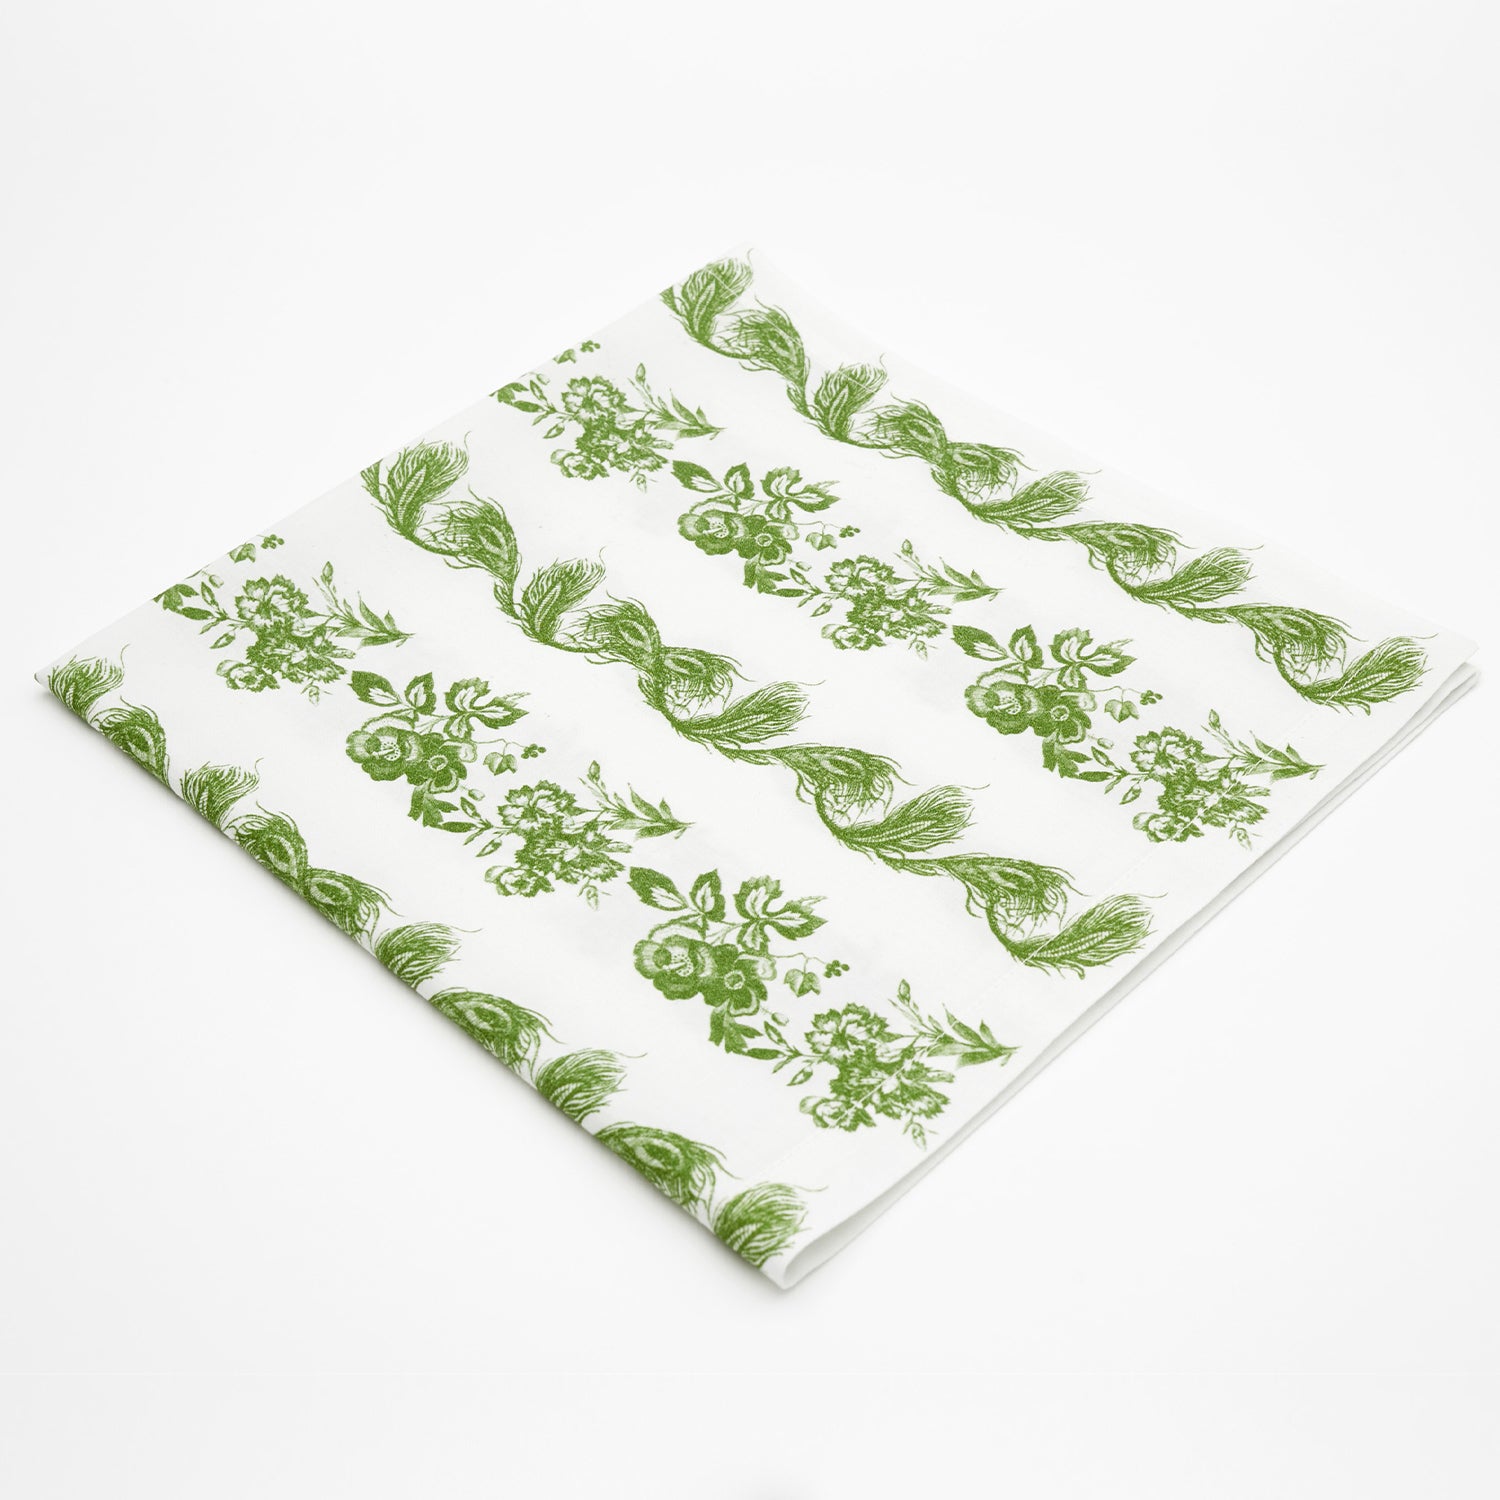 Feathers & Flowers Green Cotton Napkin